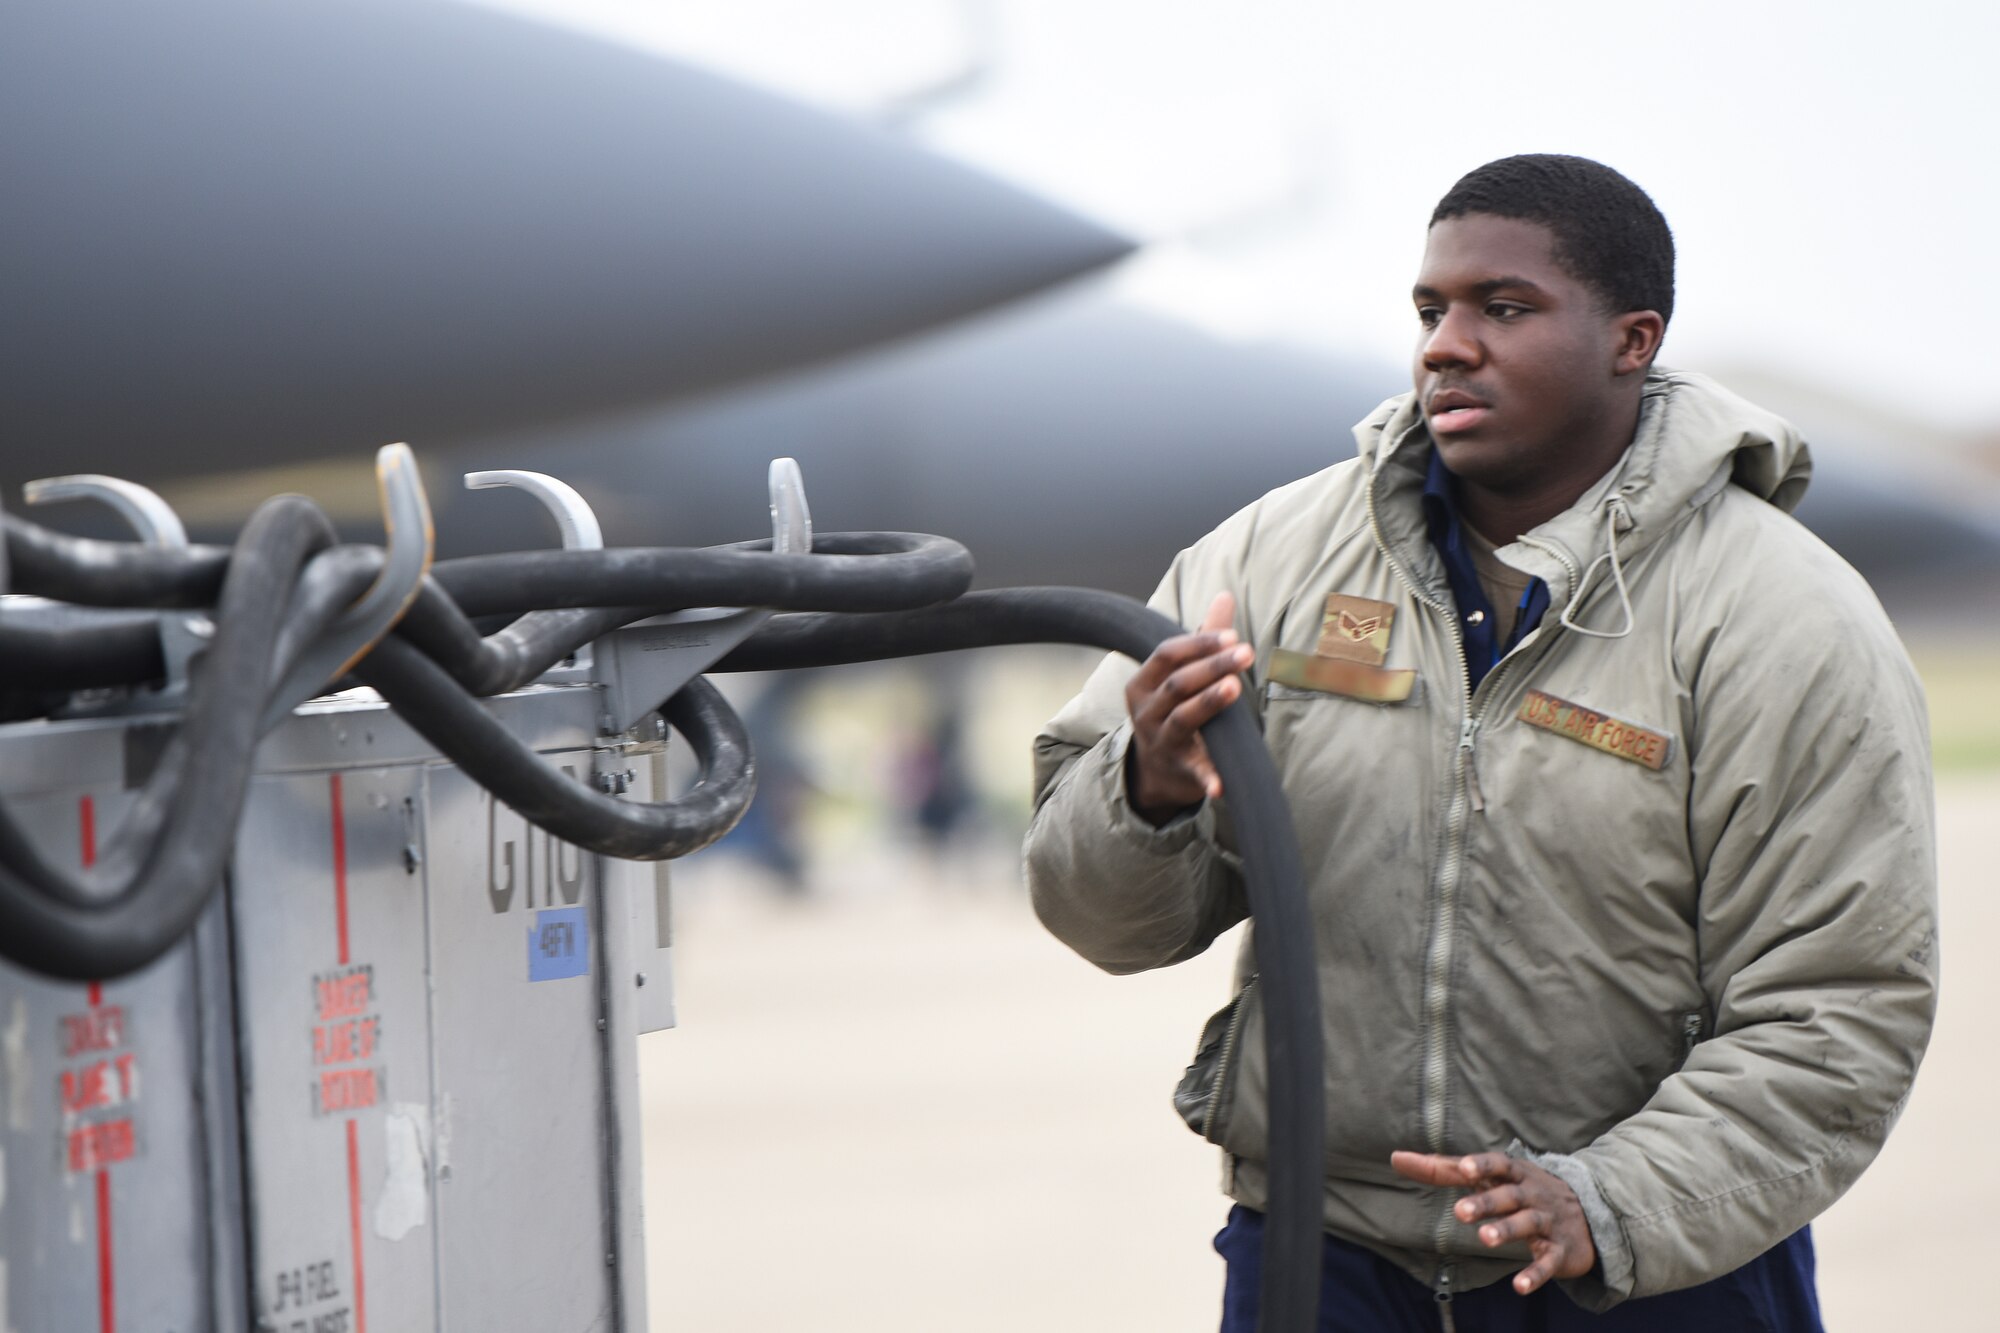 A 492nd Aircraft Maintenance Unit crew chief wraps up maintenance equipment after completing a functional inspection at Royal Air Force Lakenheath, England, Jan. 7, 2019. 48th Aircraft Maintenance Squadron Airmen maintain world's premier multi-role fighter, the F-15E Strike Eagle, to ensure RAF Lakenheath remains combat-ready. (U.S. Air Force photo by Airman 1st Class Shanice Williams-Jones)